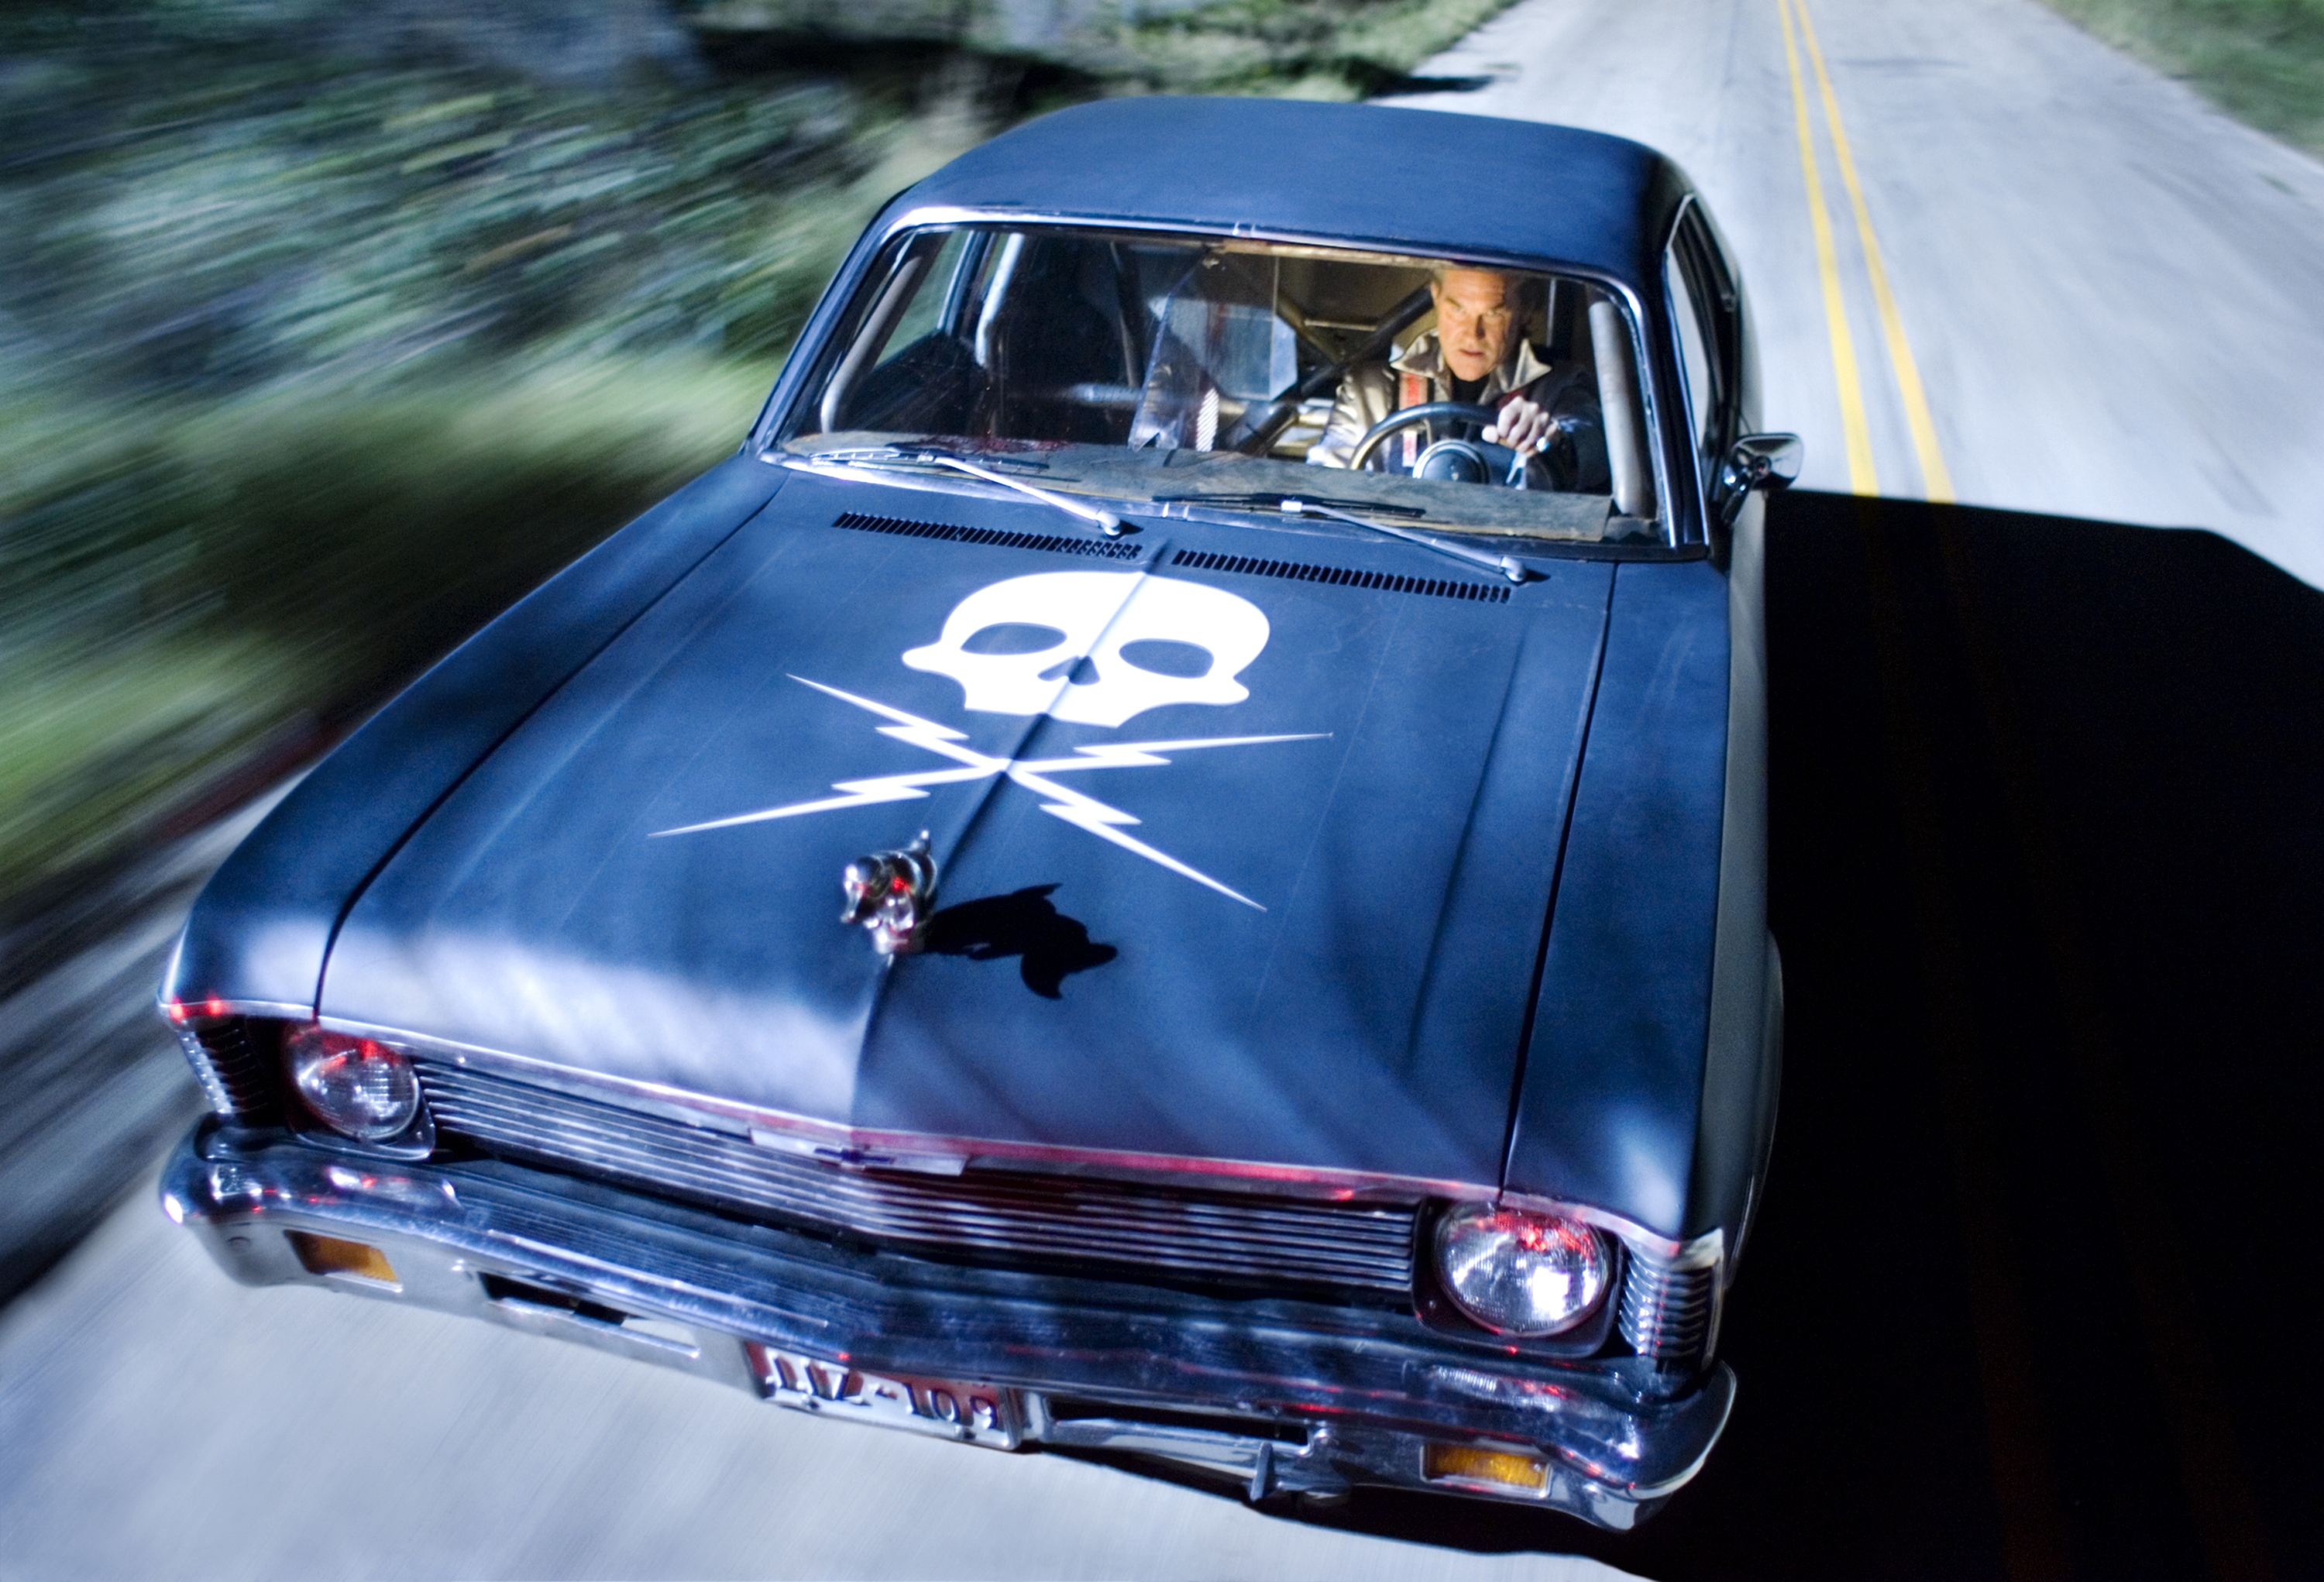 <p>Kurt Russell was ideal for being in <i>Death Proof</i>, the story of a stuntman who liked to take unsuspecting women for rides. In the movie, the driver's seat is a proper racing seat with padding and a reinforced roof panel.</p> <p>As for the passenger side, the seat is a tractor with Plexiglass surrounding it. There were only four of these famous cars built for the movie, and the single fully caged vehicle that ran good enough to do the driving scenes was named "The Jesus." The other, called "The Prius," was destroyed while filming, which left "The Jesus" up for grabs.</p>